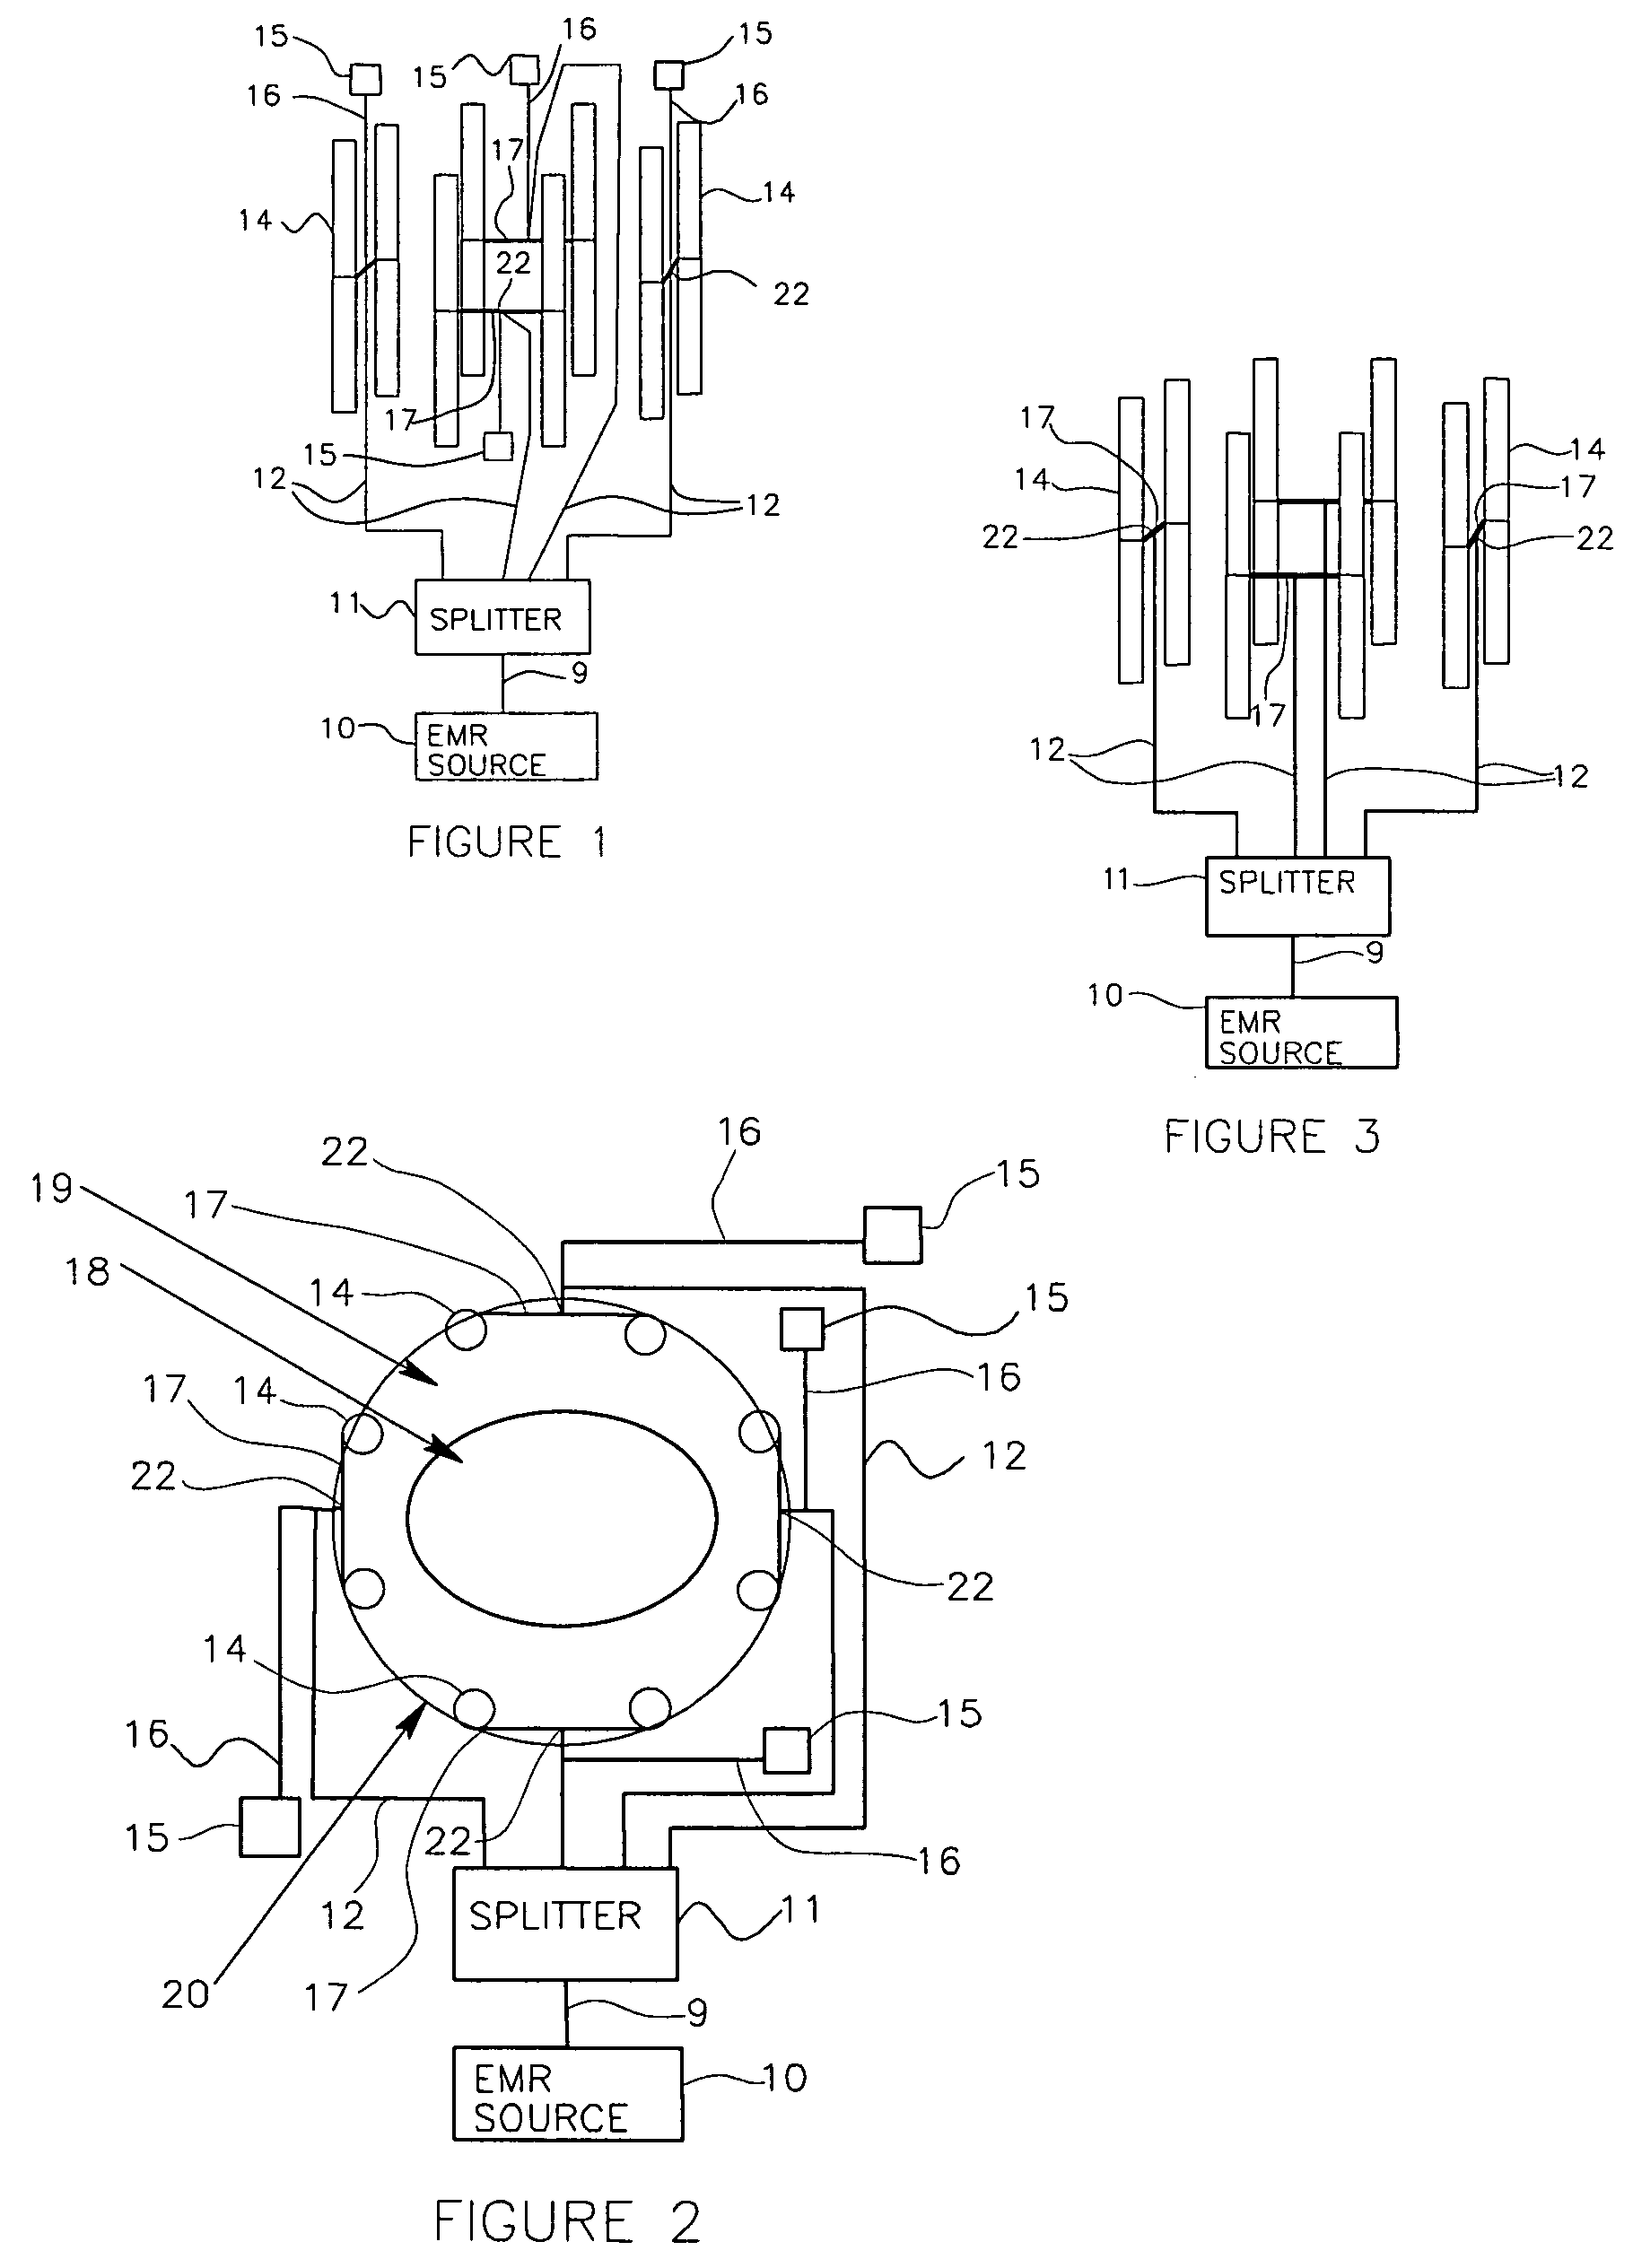 Apparatus for creating hyperthermia in tissue